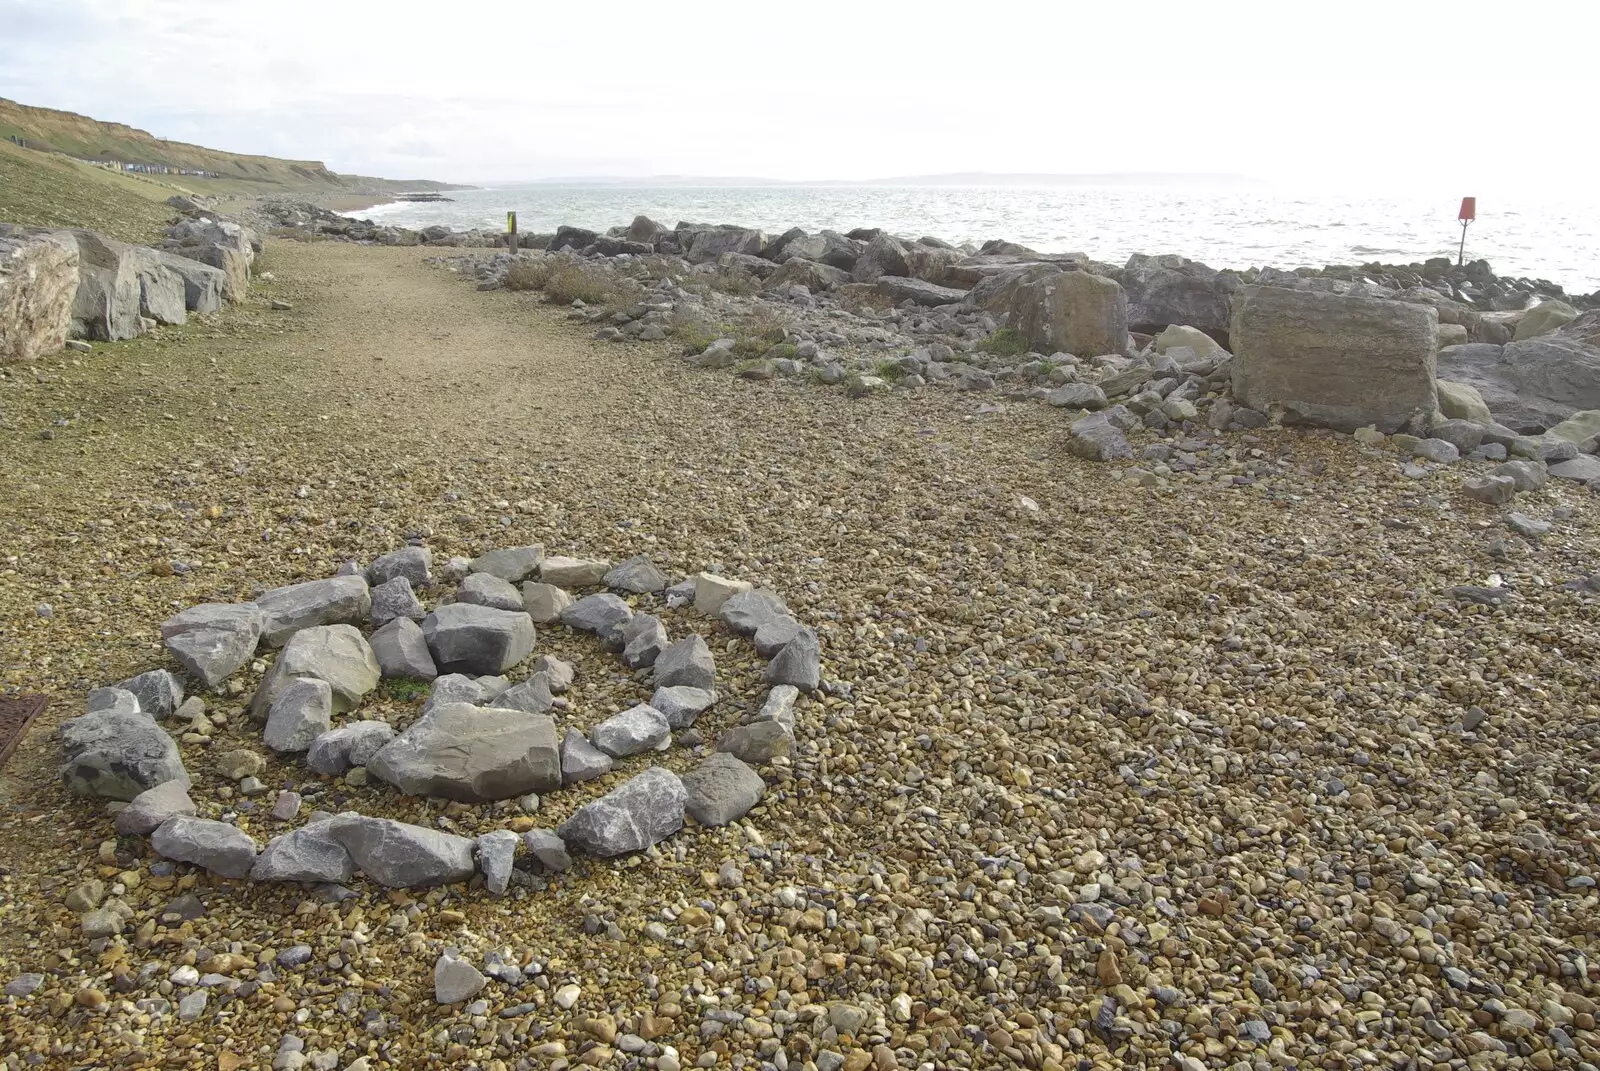 A rock spiral on the beach, from A Trip to New Milton and Barton-on-Sea, Hampshire - 27th November 2008